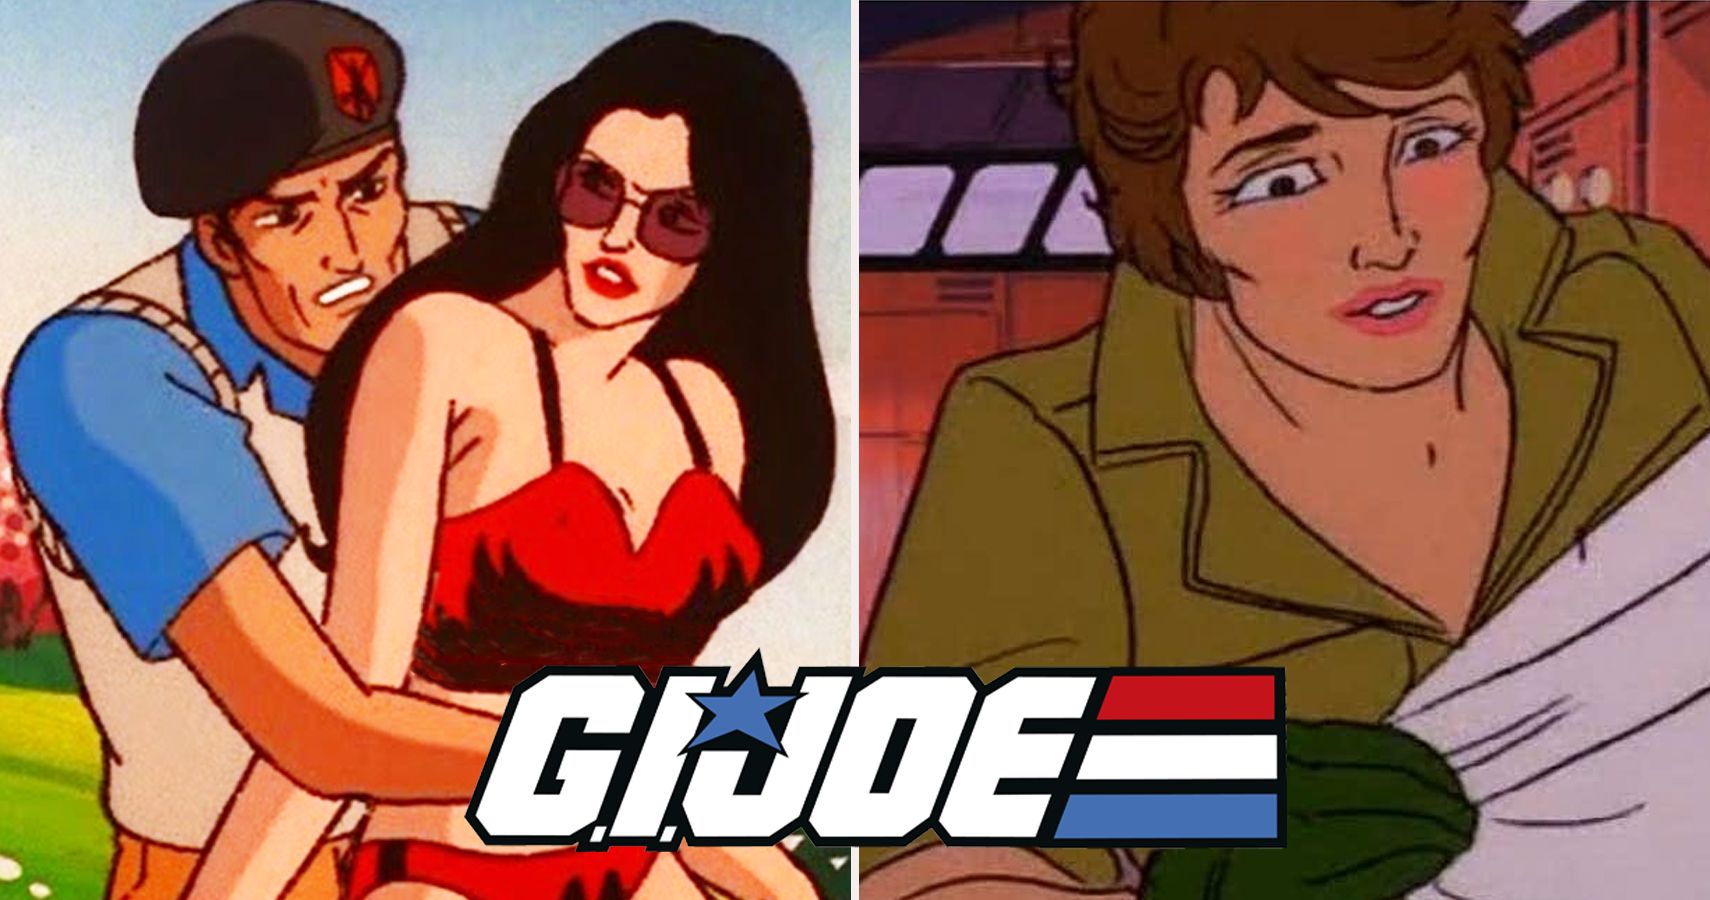 Inappropriate Things You Never Noticed In G. I. Joe